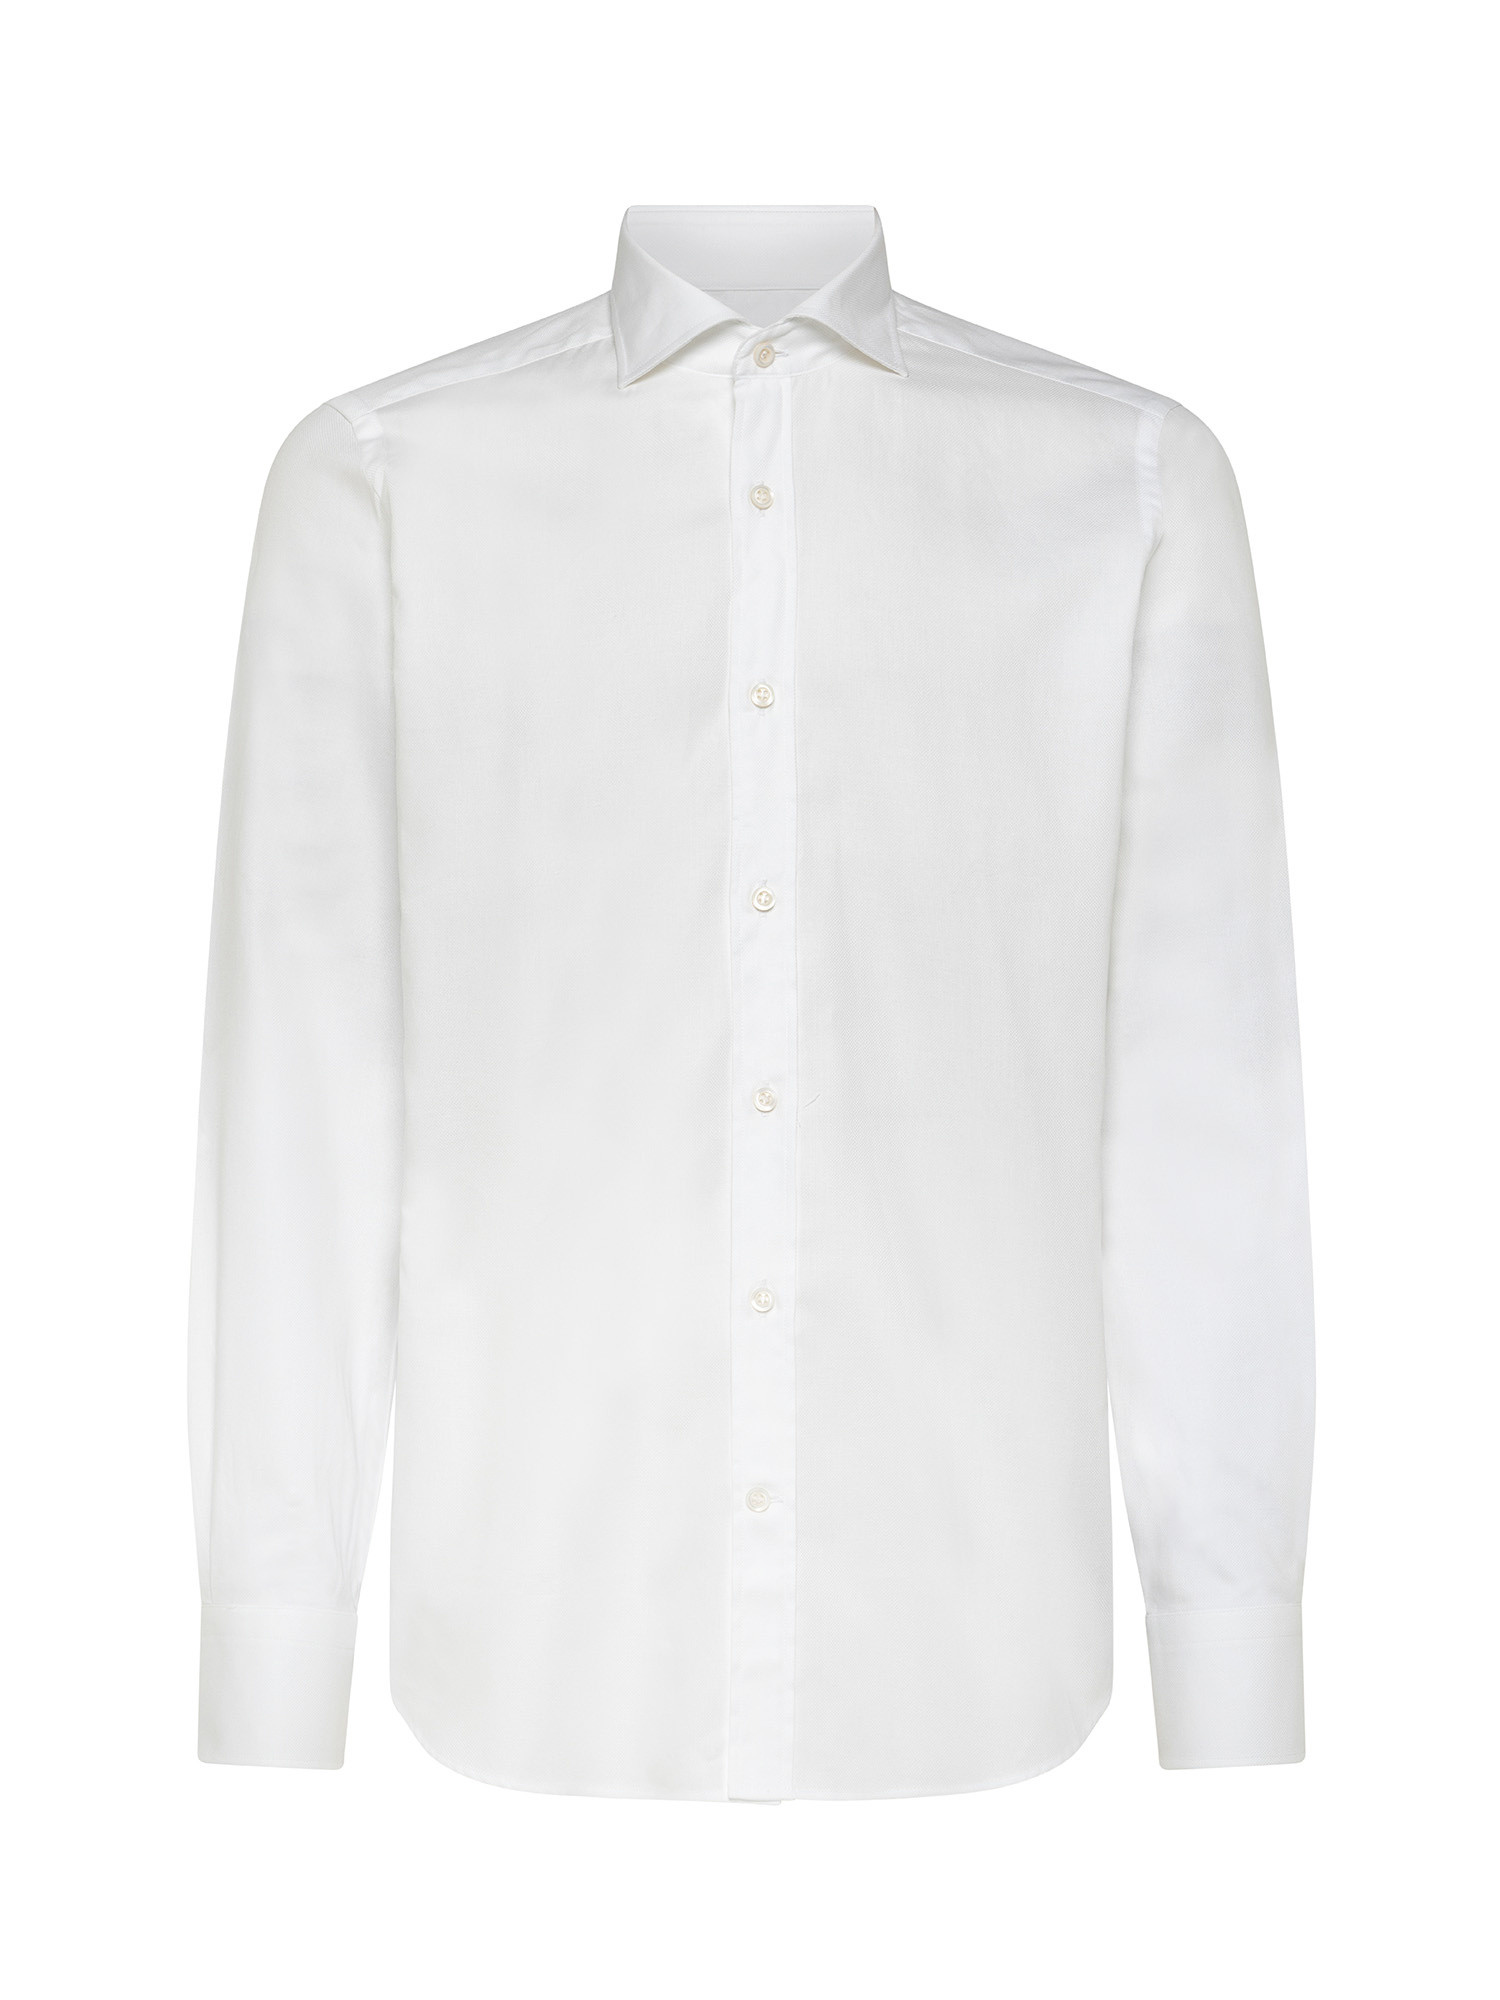 Camicia slim fit in puro cotone, Bianco panna, large image number 1